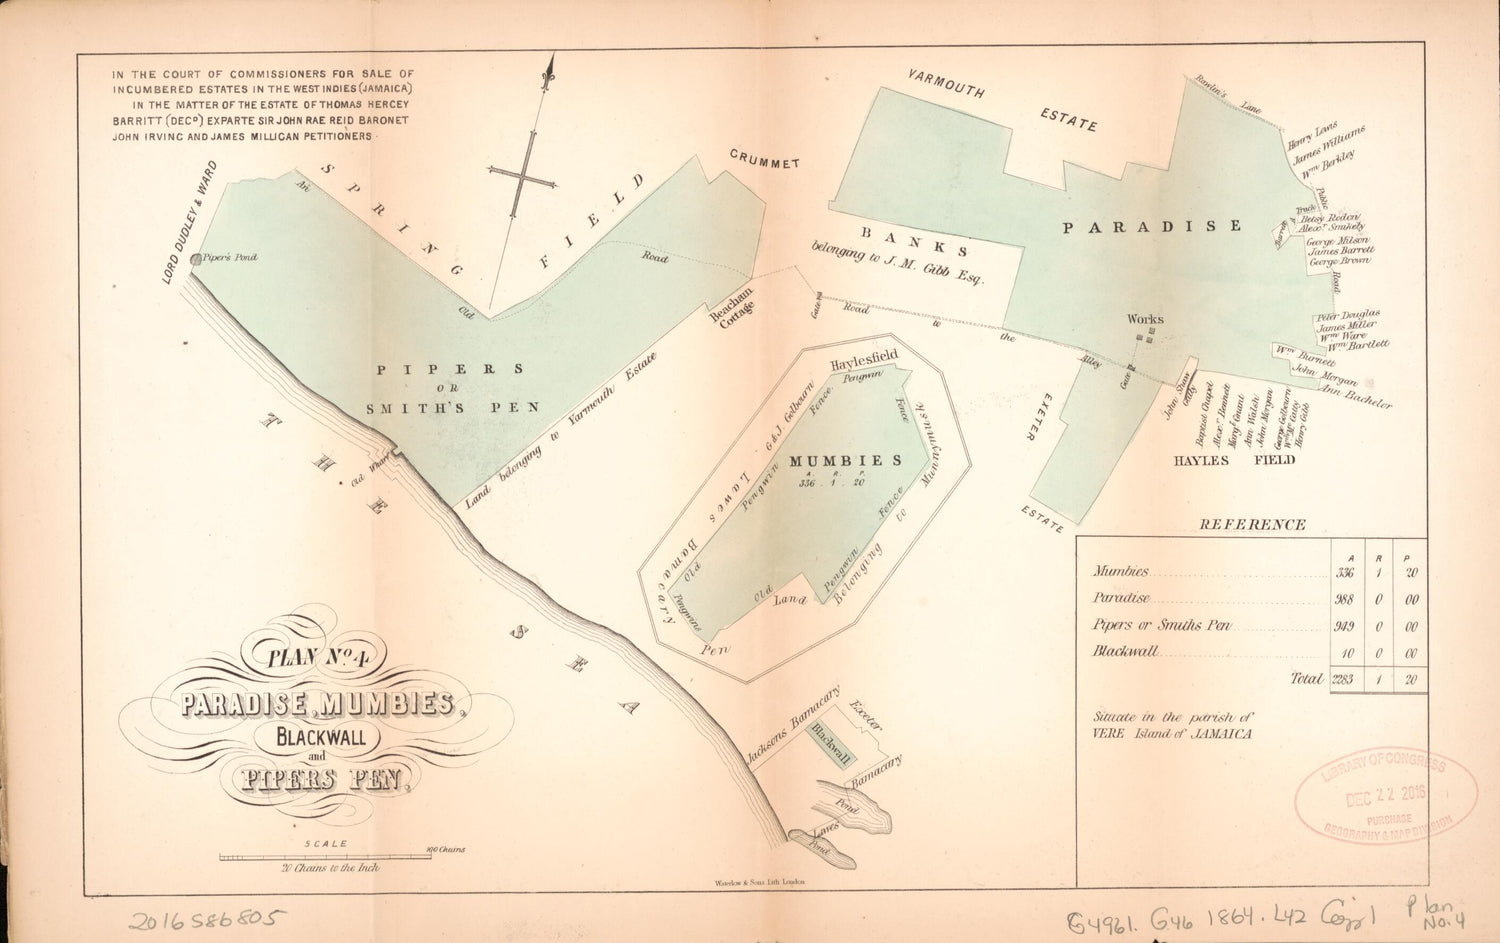 This old map of Plan No. 4 Paradise, Mumbies, Blackwall and Pipers Pen from Encumbered Estates In the West Indies (Jamaica) from 1864 was created by Henry James Stonor in 1864